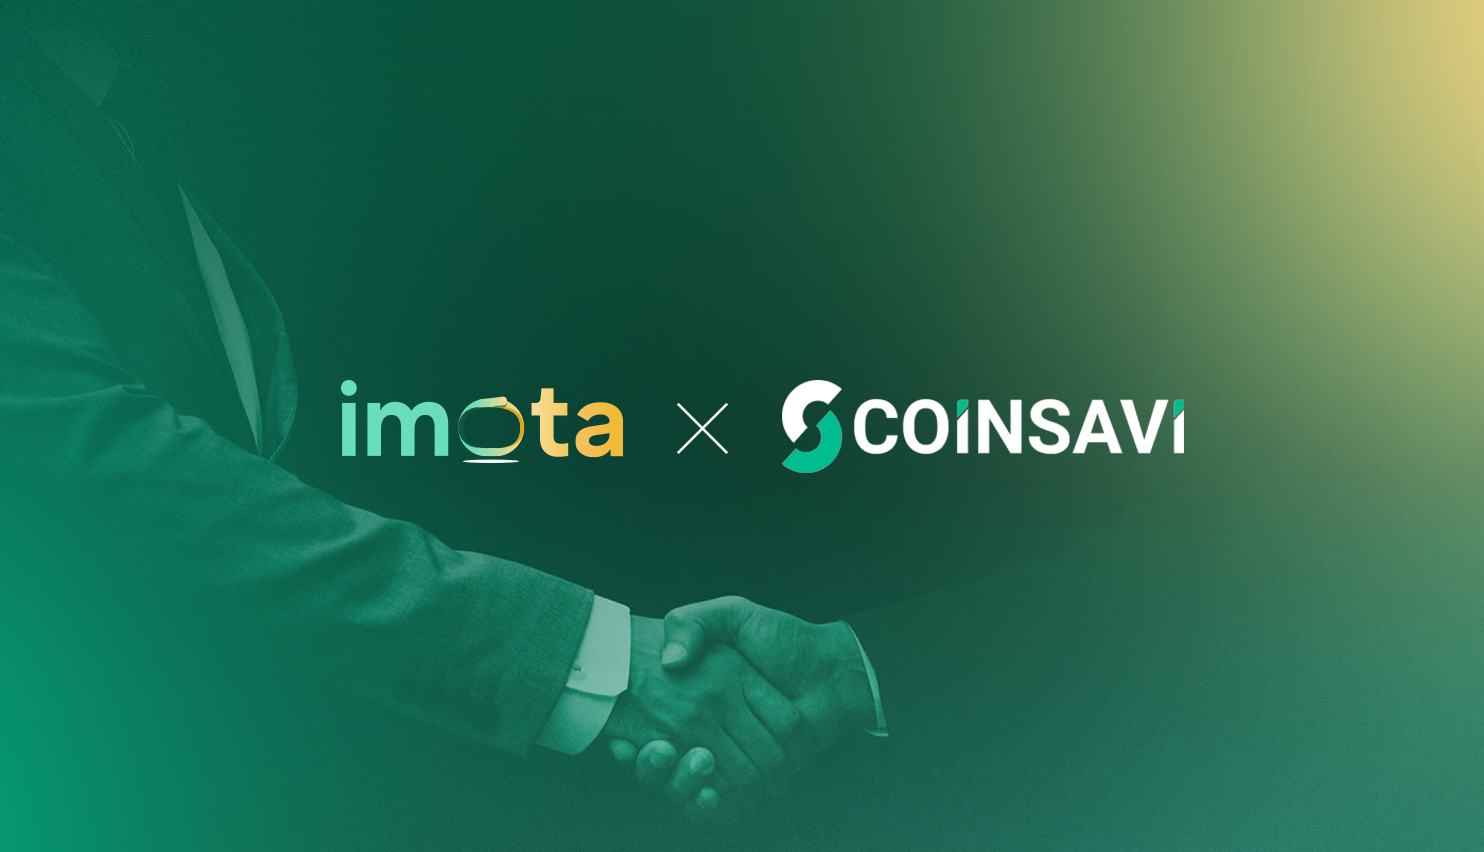 Announcement: Imota officially partners with Coinsavi crypto currency exchange in the decentralized earning revolution